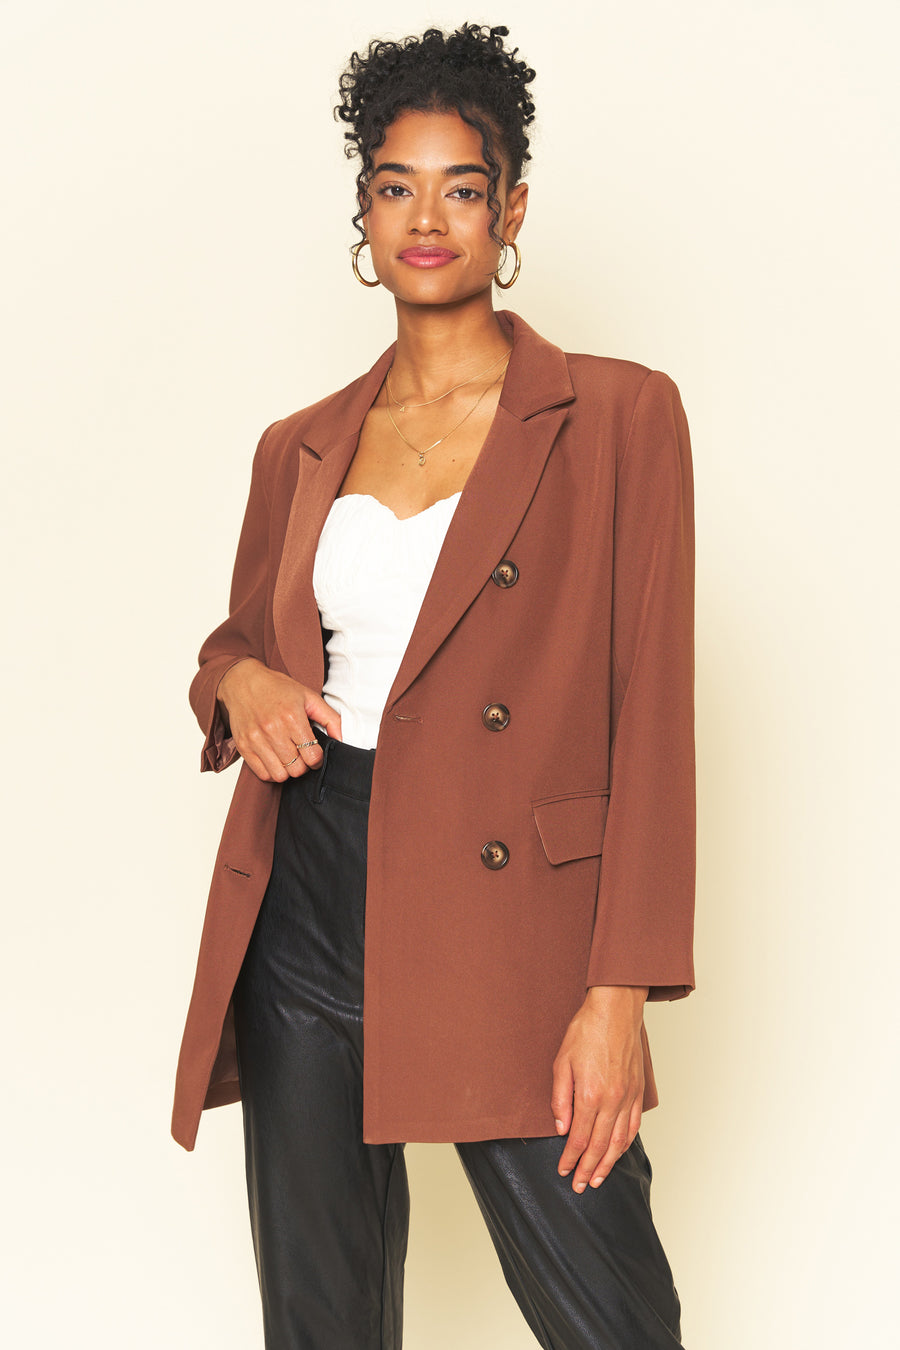 No Srcipt image - Images of 1 of 6 Brown Wool Classic Double Breasted Staple Jacket Women's Workwear Office Wear Women's Fashion Sophisticated Style Chic Simple Classic Brown Blazer Fall Jacket Fall Fashion Women's Outerwear Timeless Everyday Blazer Neutral Color The Emory Blazer In Brown